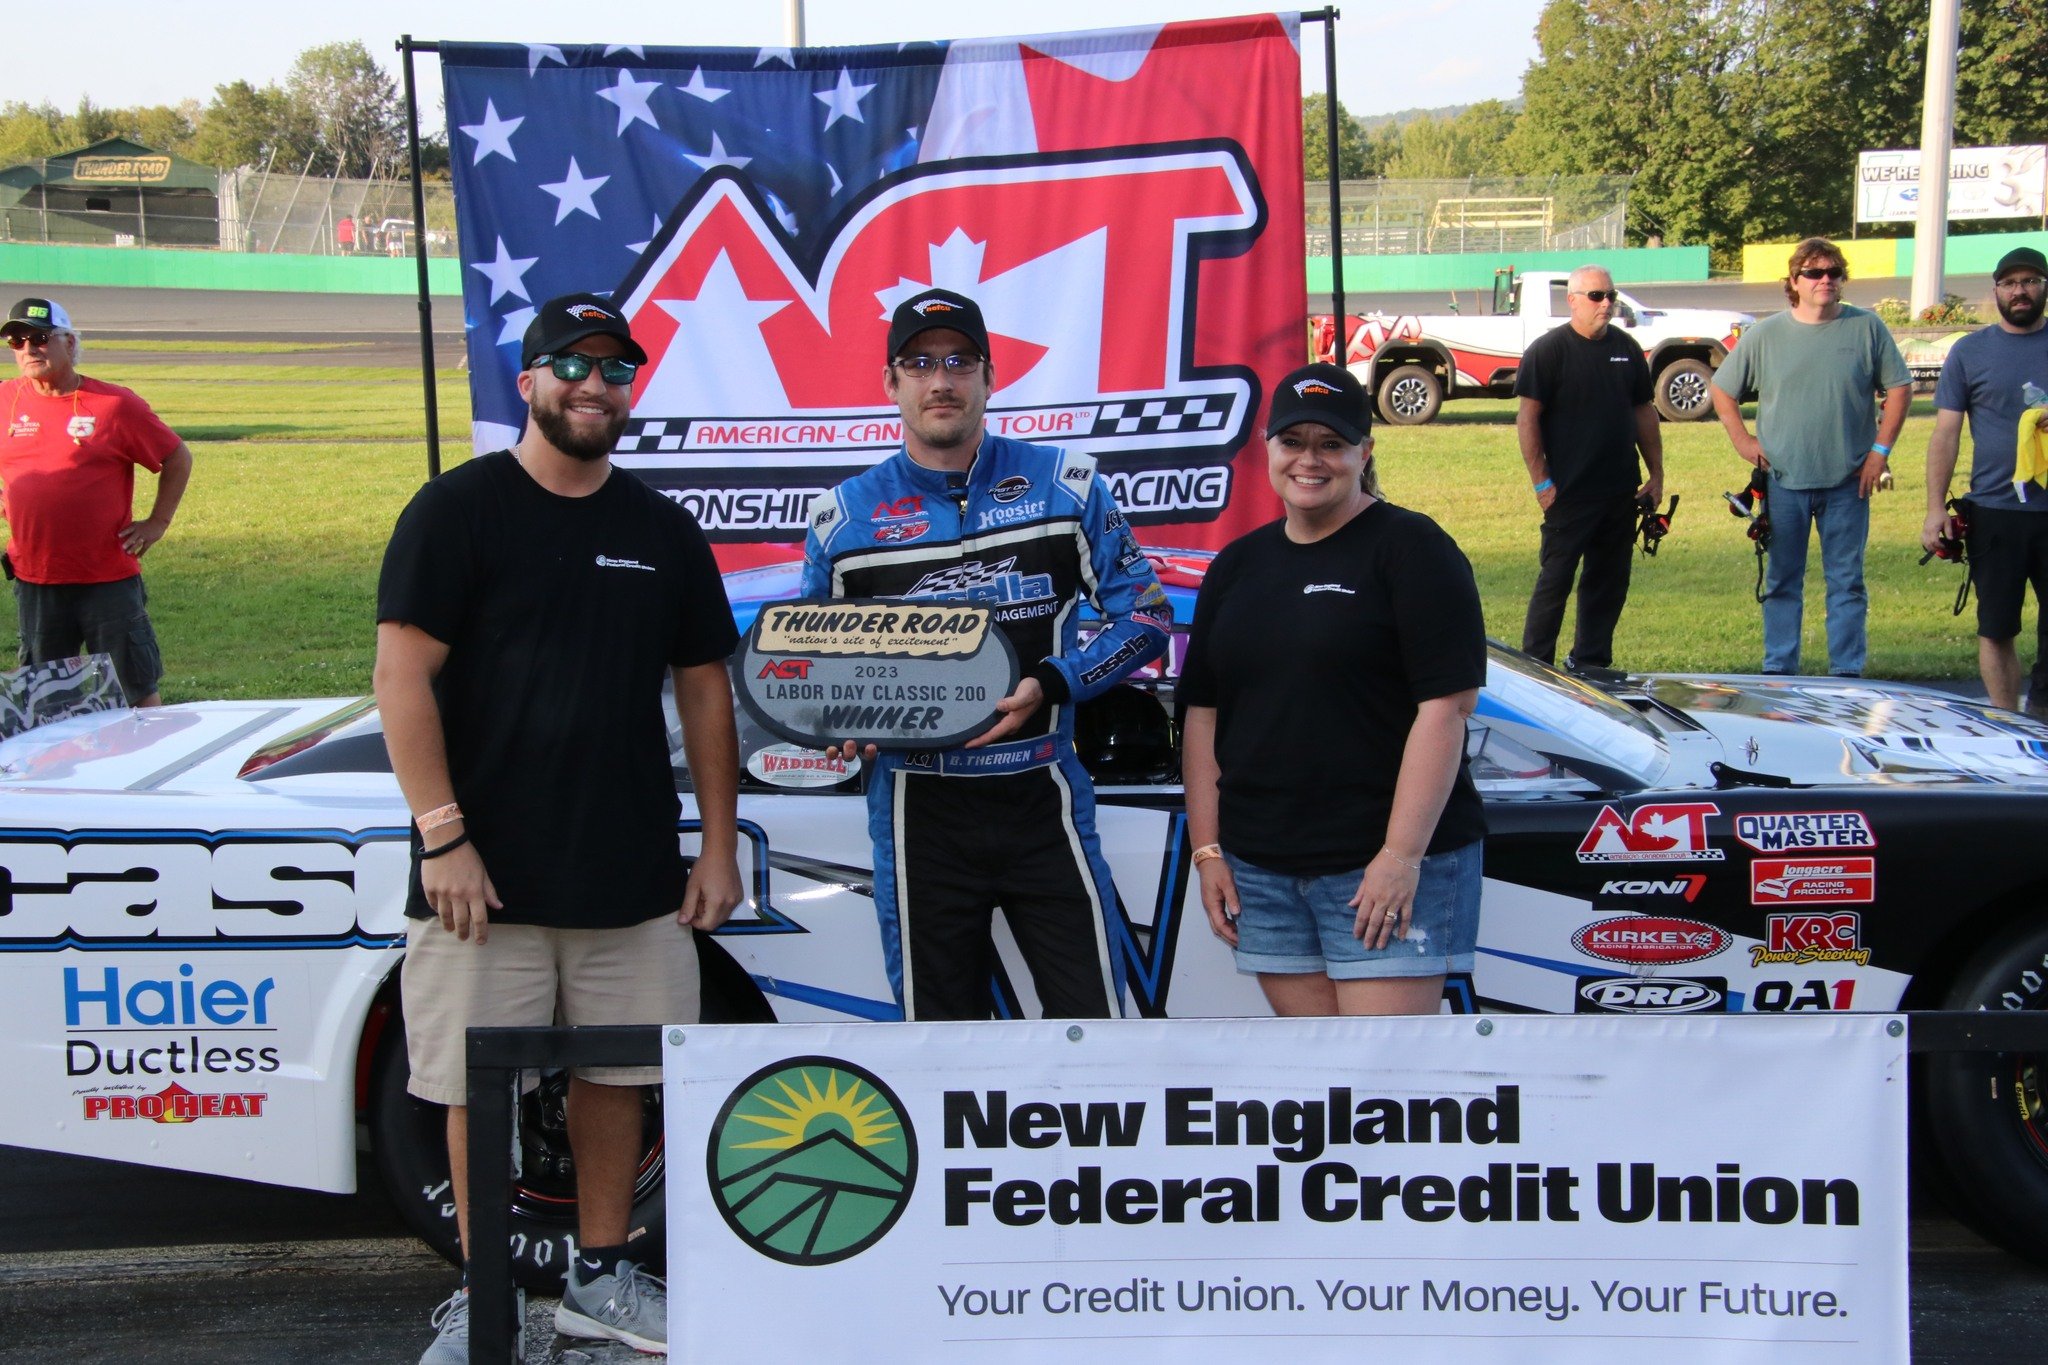 @nefcu / @vsecu Return to Headline the 46th Labor Day Classic 200 for the @acttour on Sunday, September 1st - Read more at thunderroadvt.com

📸 Alan Ward